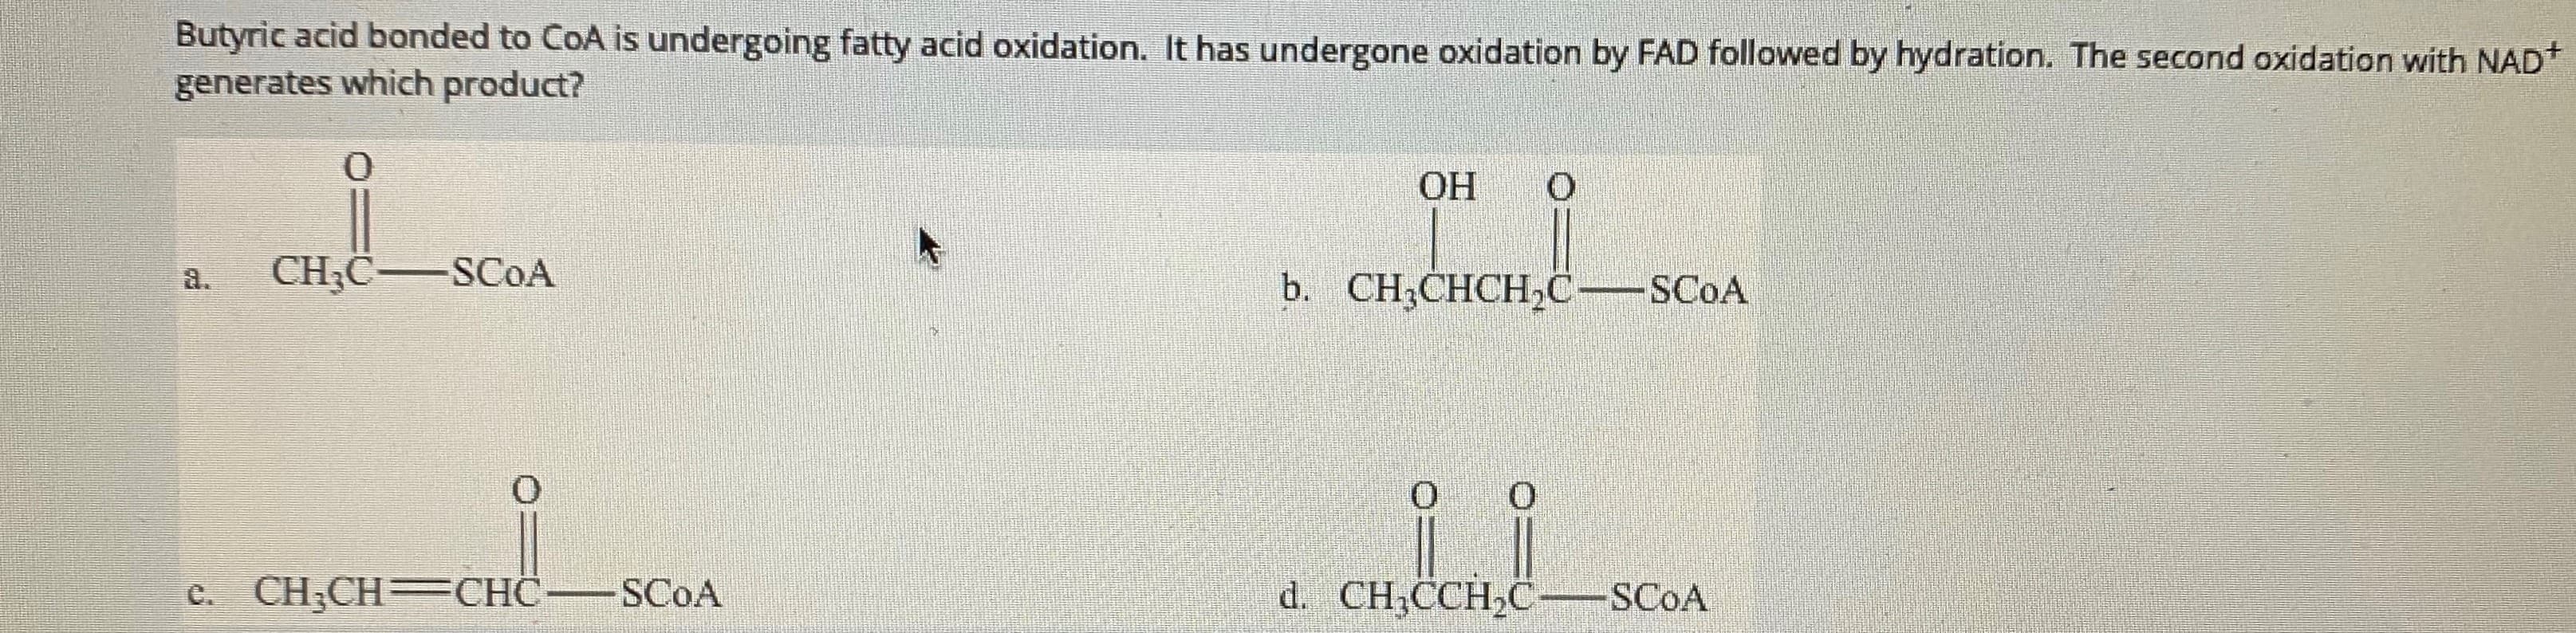 Butyric acid bonded to CoA is undergoing fatty acid oxidation. It has undergone oxidation by FAD followed by hydration. The second oxidation with NAD*
generates which product?
